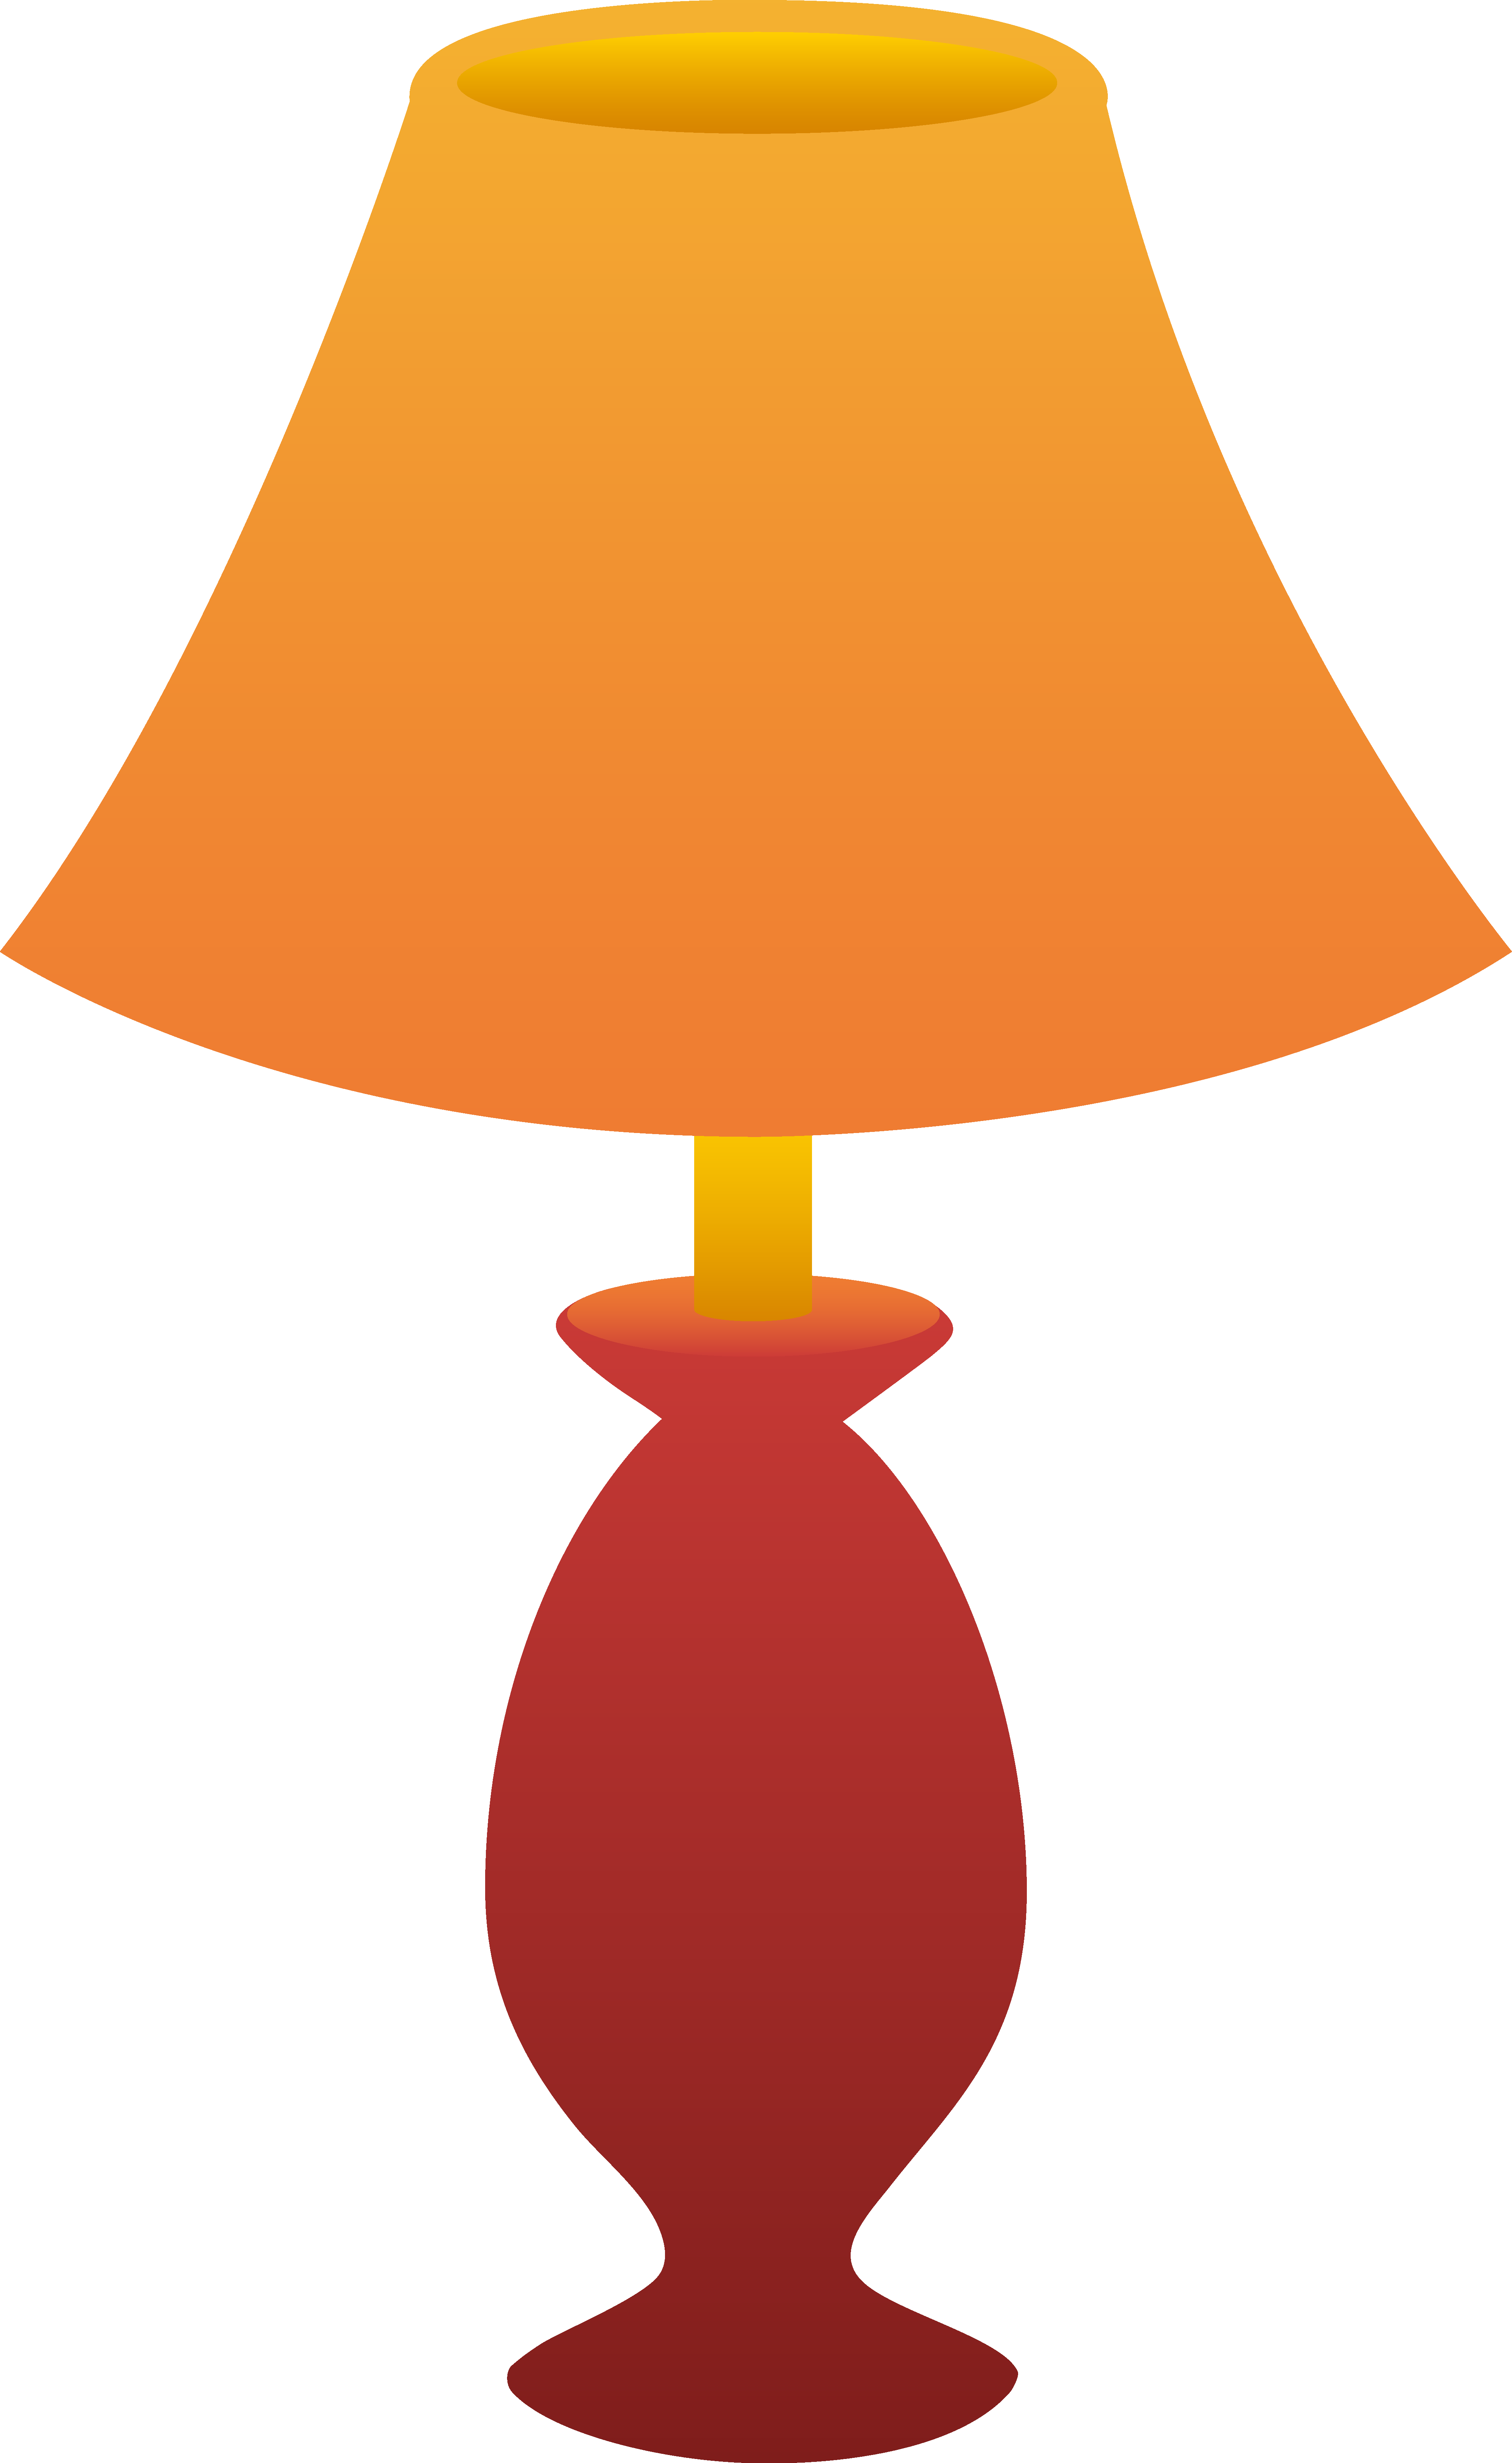 Lamp Clip | Free Download Clip Art | Free Clip Art | on Clipart ...